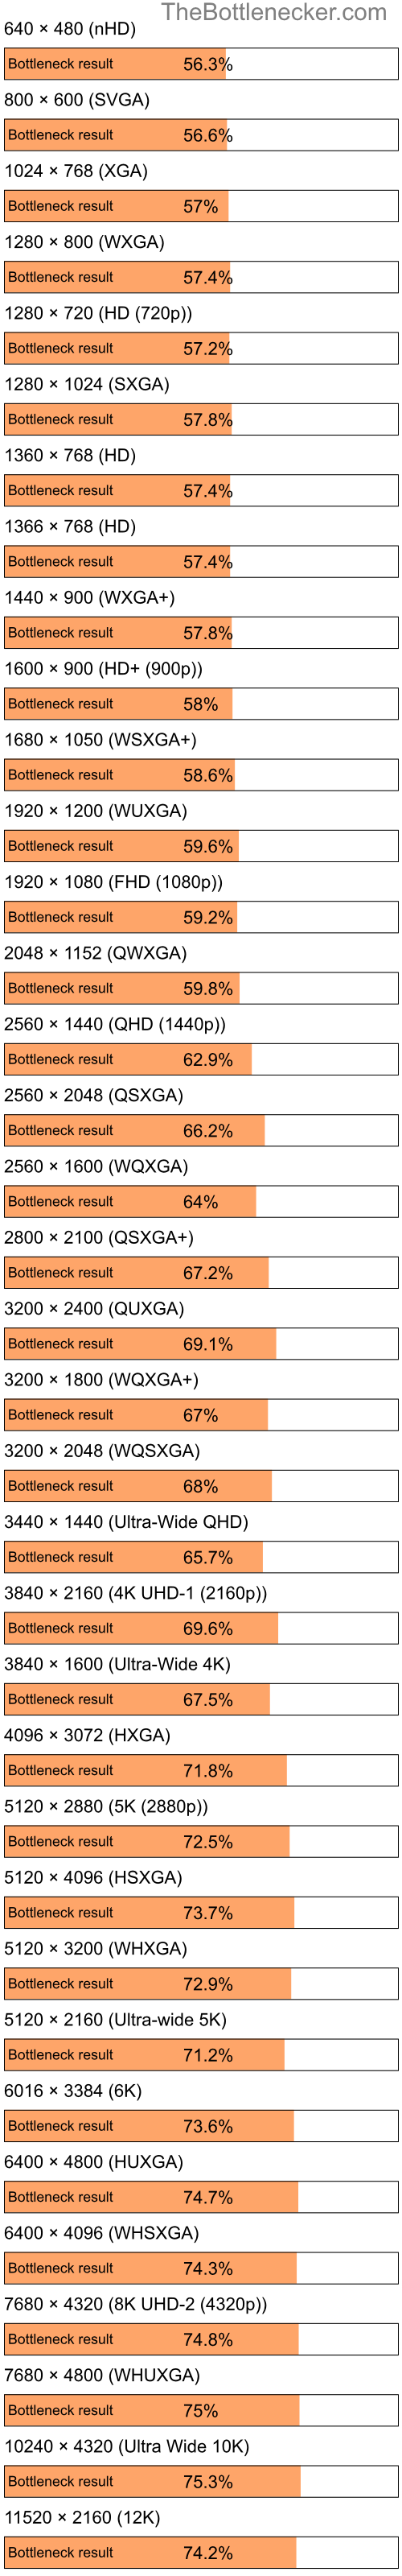 Bottleneck results by resolution for Intel Atom N280 and AMD Radeon HD 6250 in Processor Intense Tasks